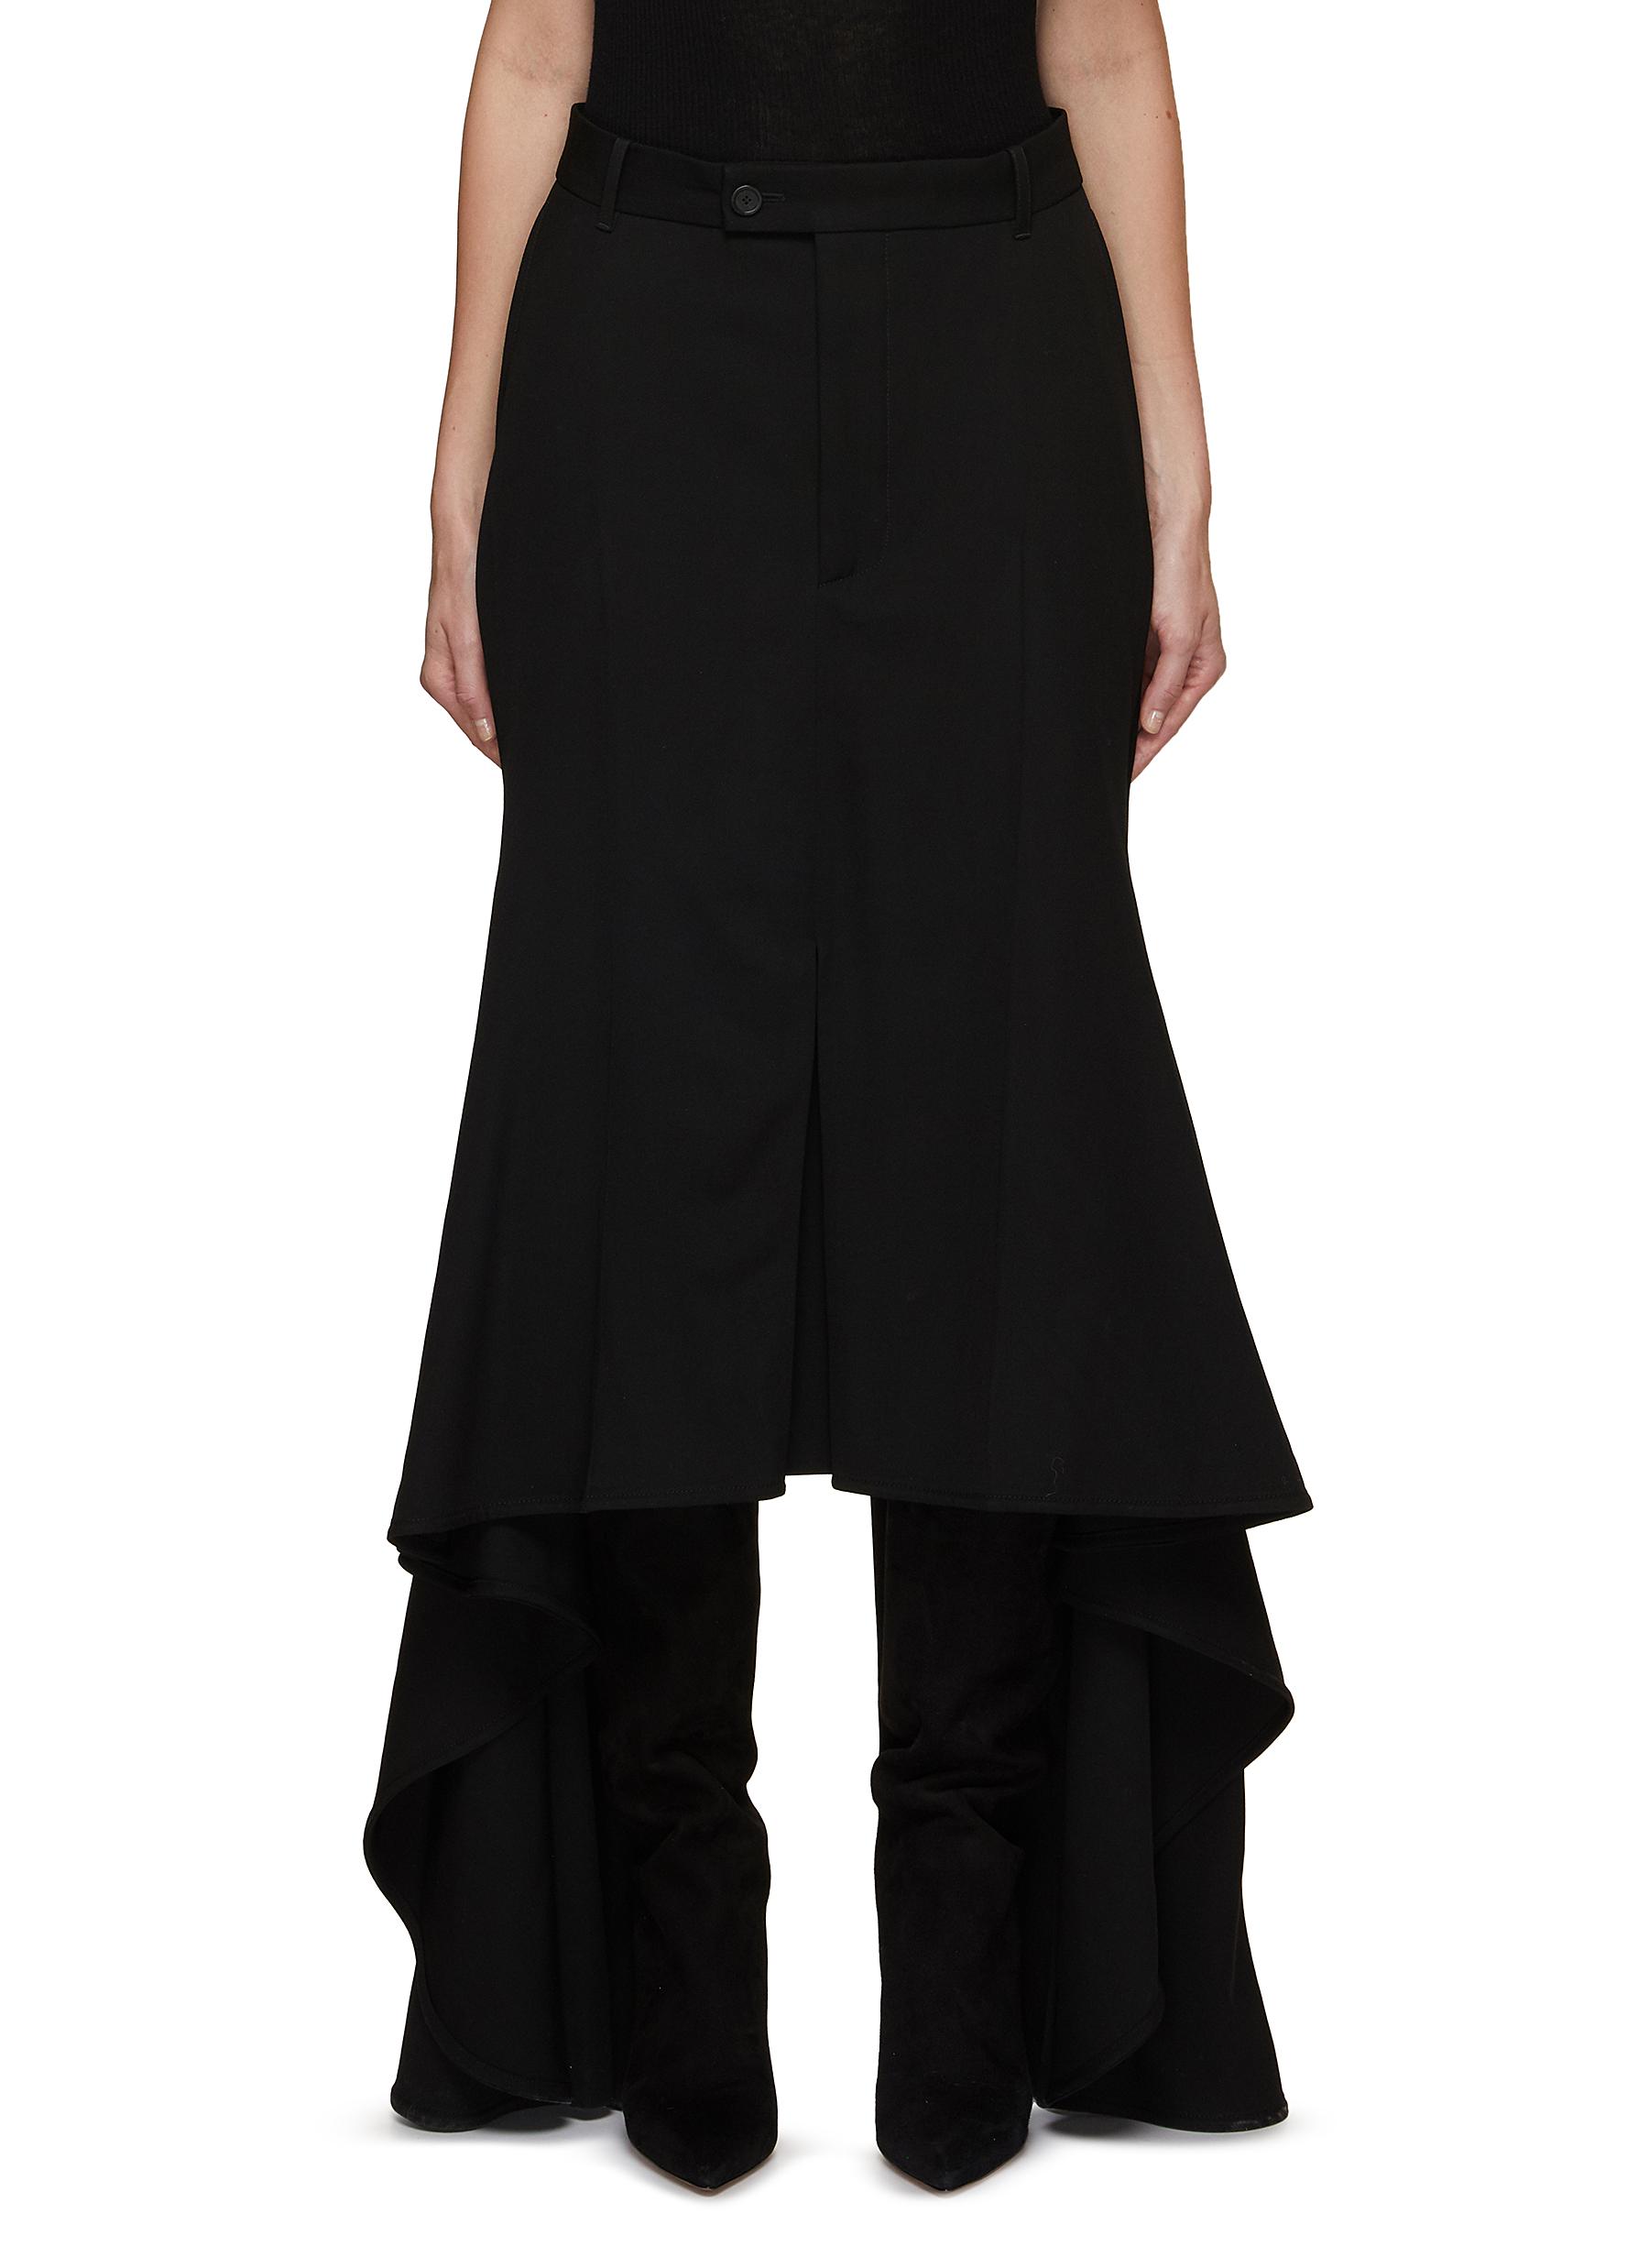 All Out Ruffled Pants, Black - N12H